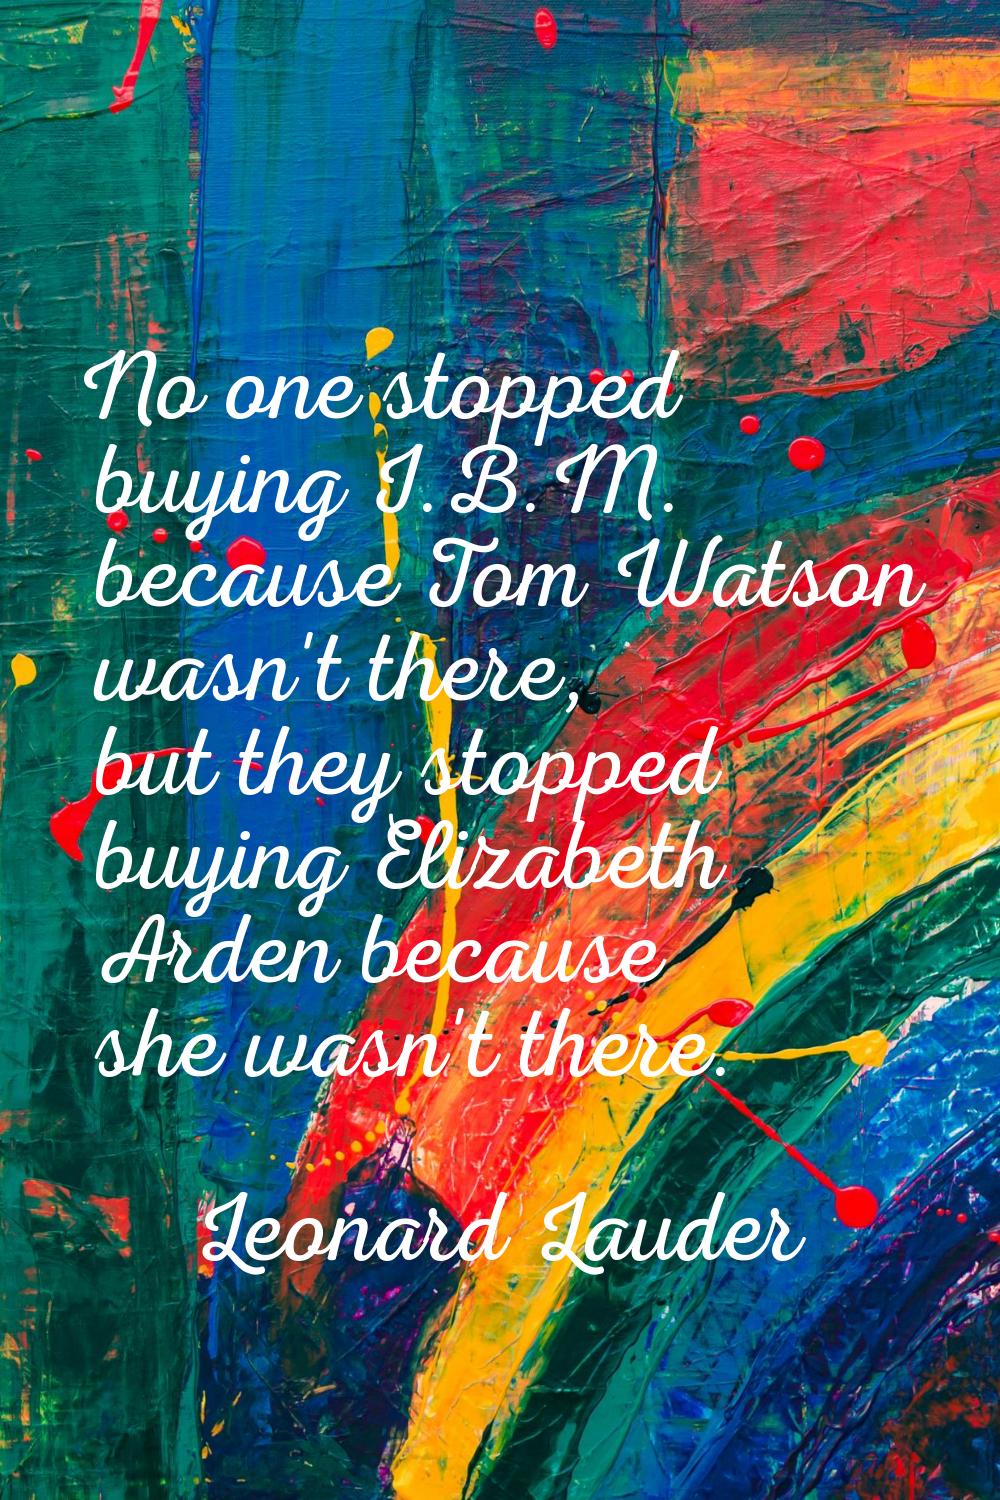 No one stopped buying I.B.M. because Tom Watson wasn't there, but they stopped buying Elizabeth Ard